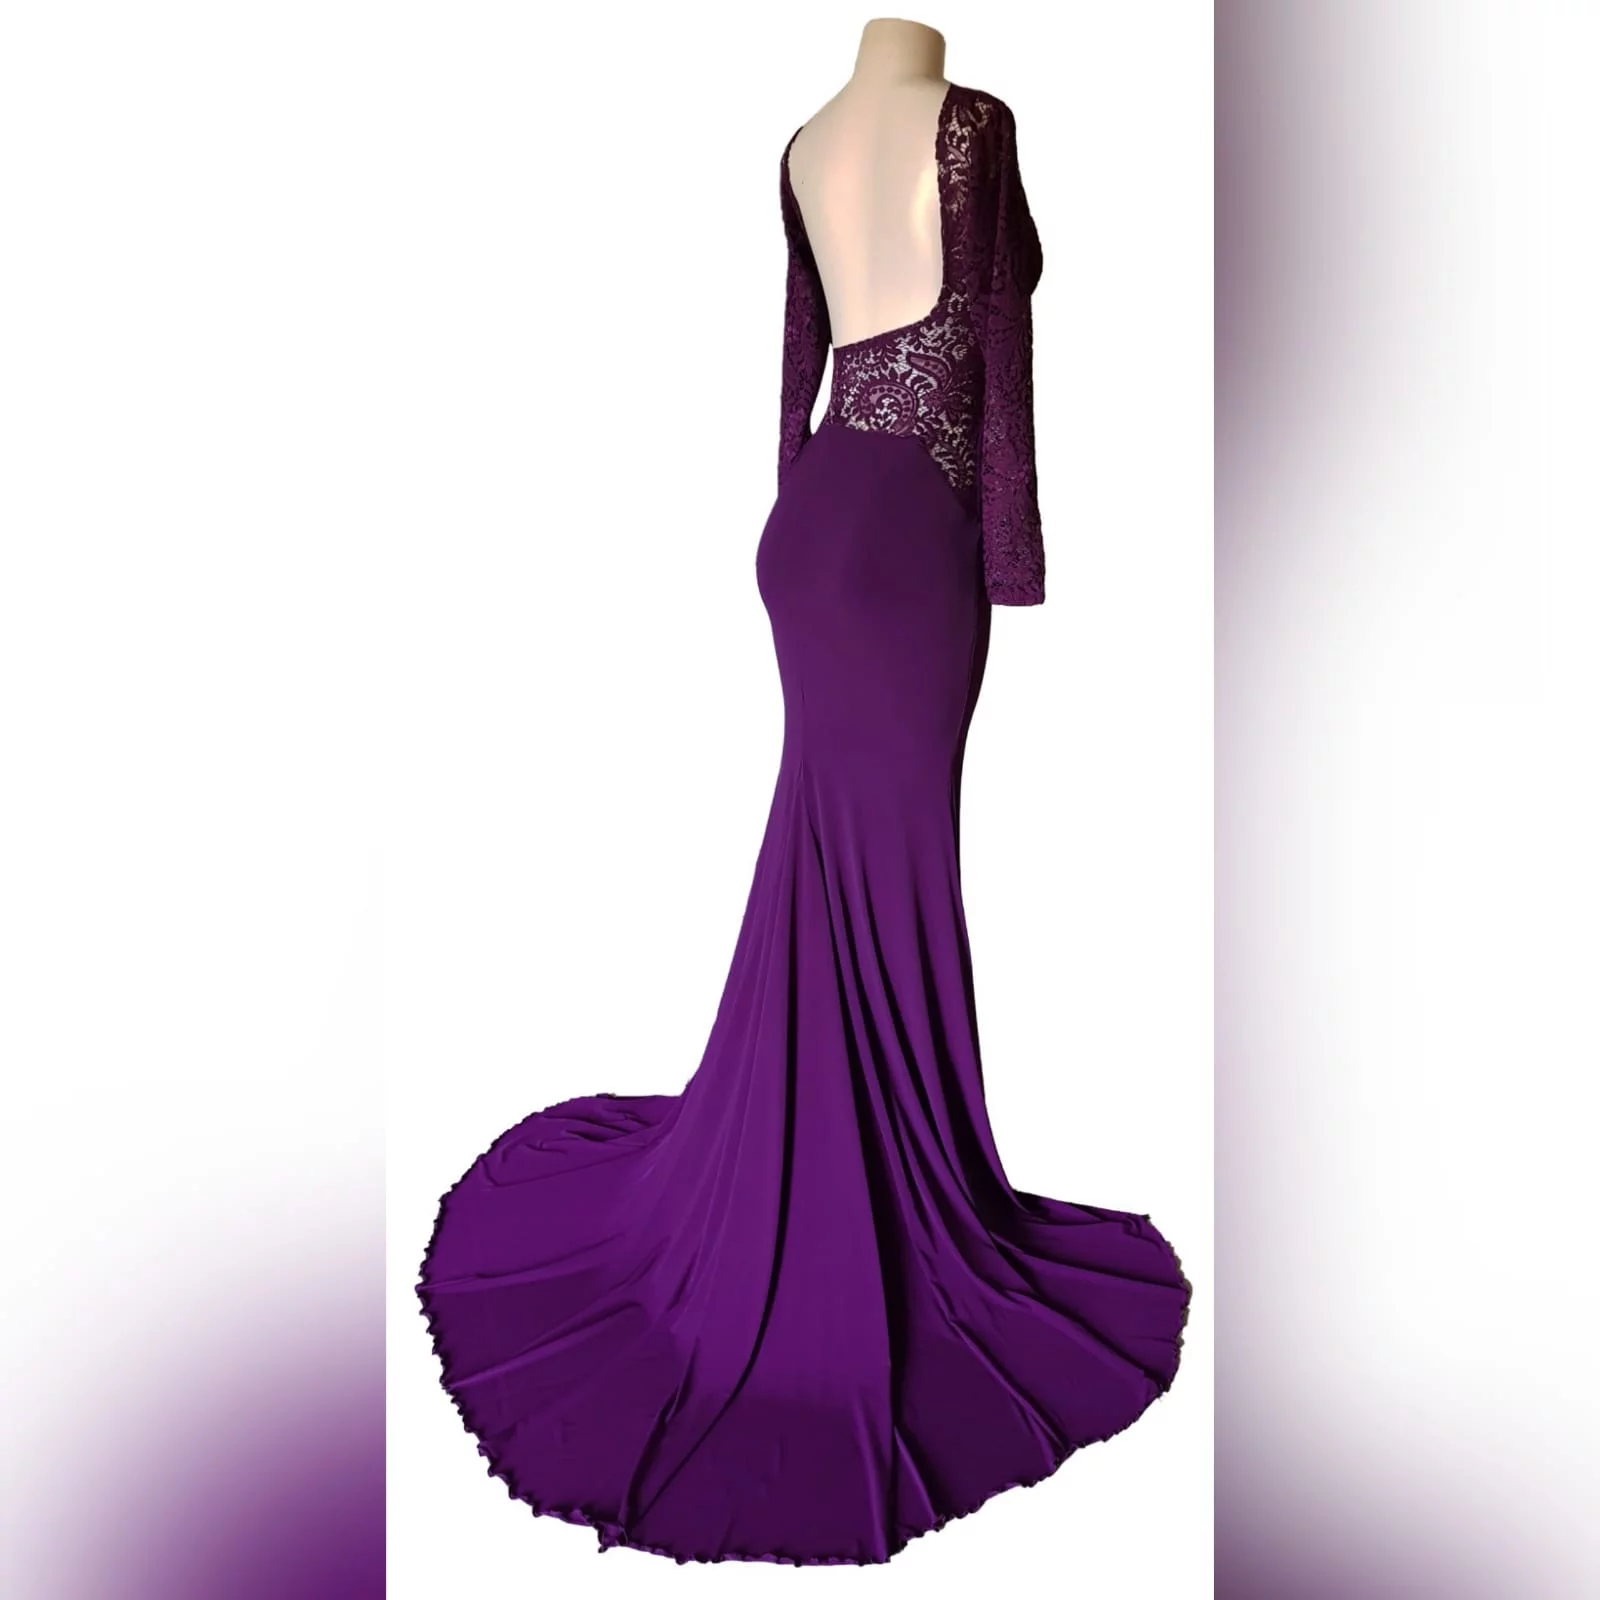 Plum lace bodice soft mermaid prom dress 7 plum lace bodice, soft mermaid prom dress with a low open rounded open back and hip lace design. With long lace sleeves and a long train.